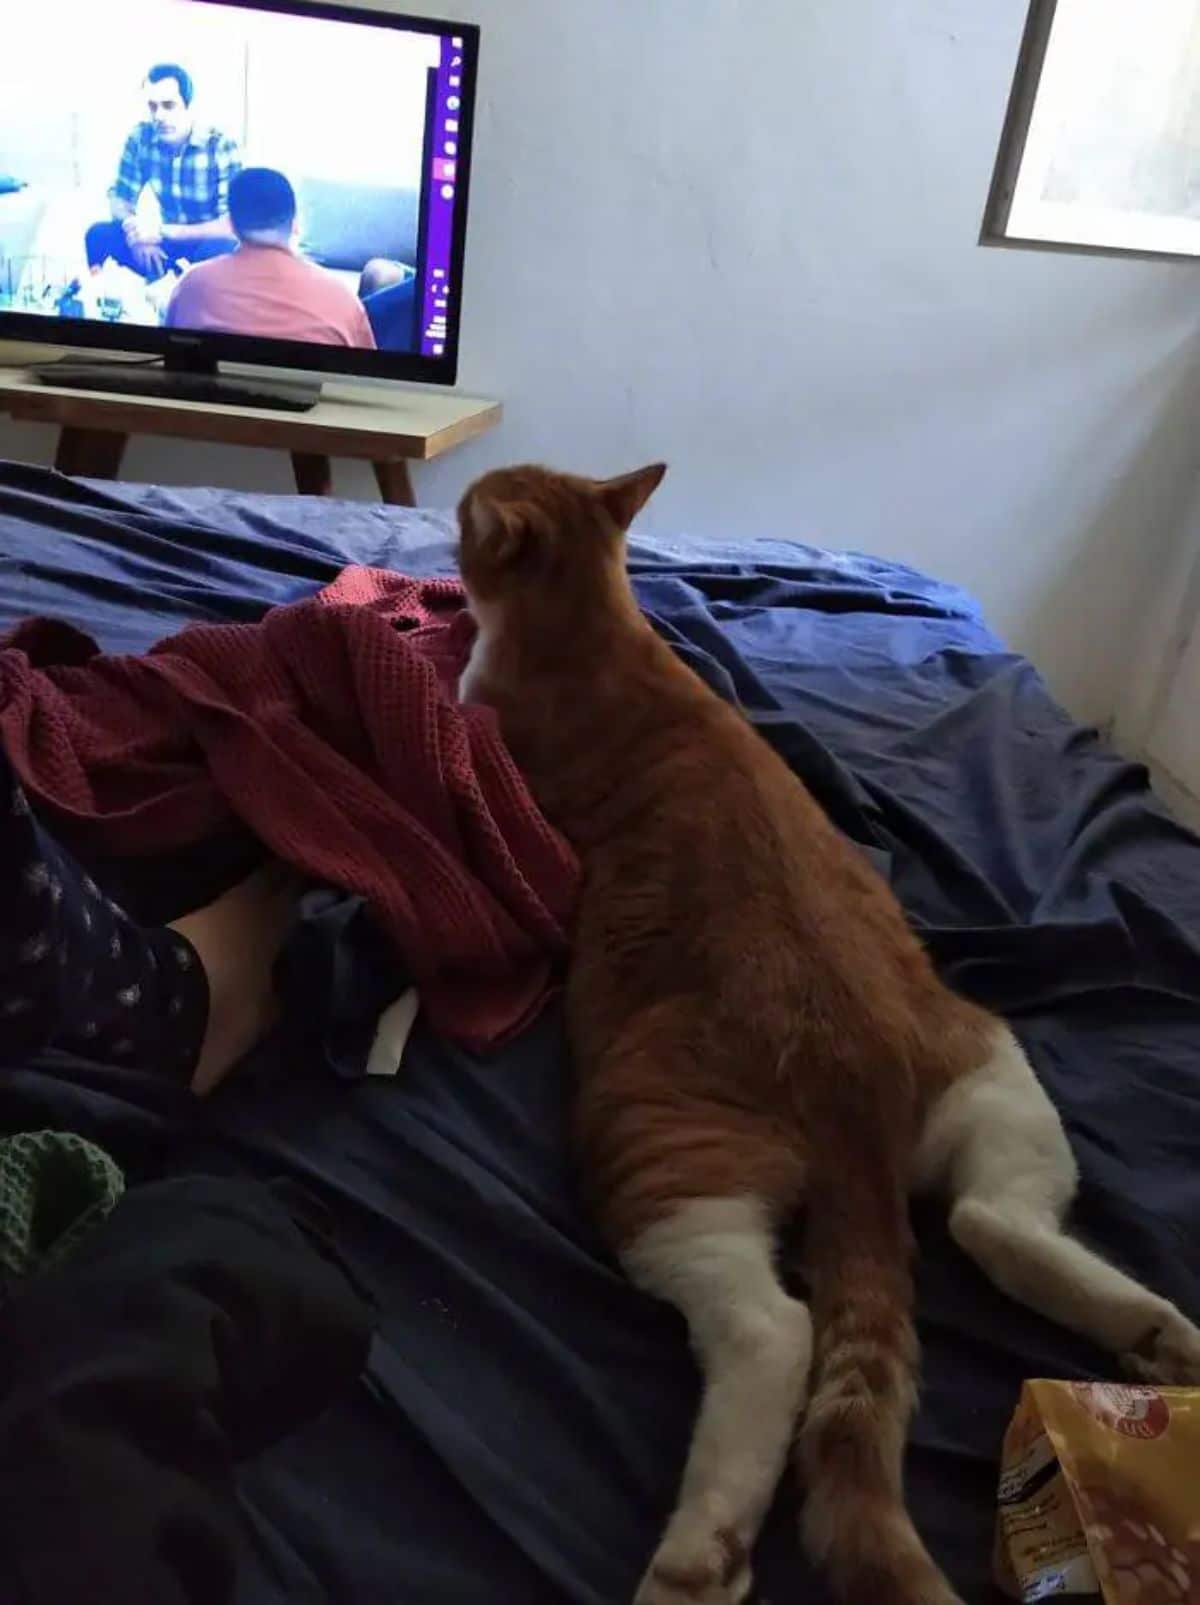 orange and white cat laying on a blue bed next to someone's feet watching television